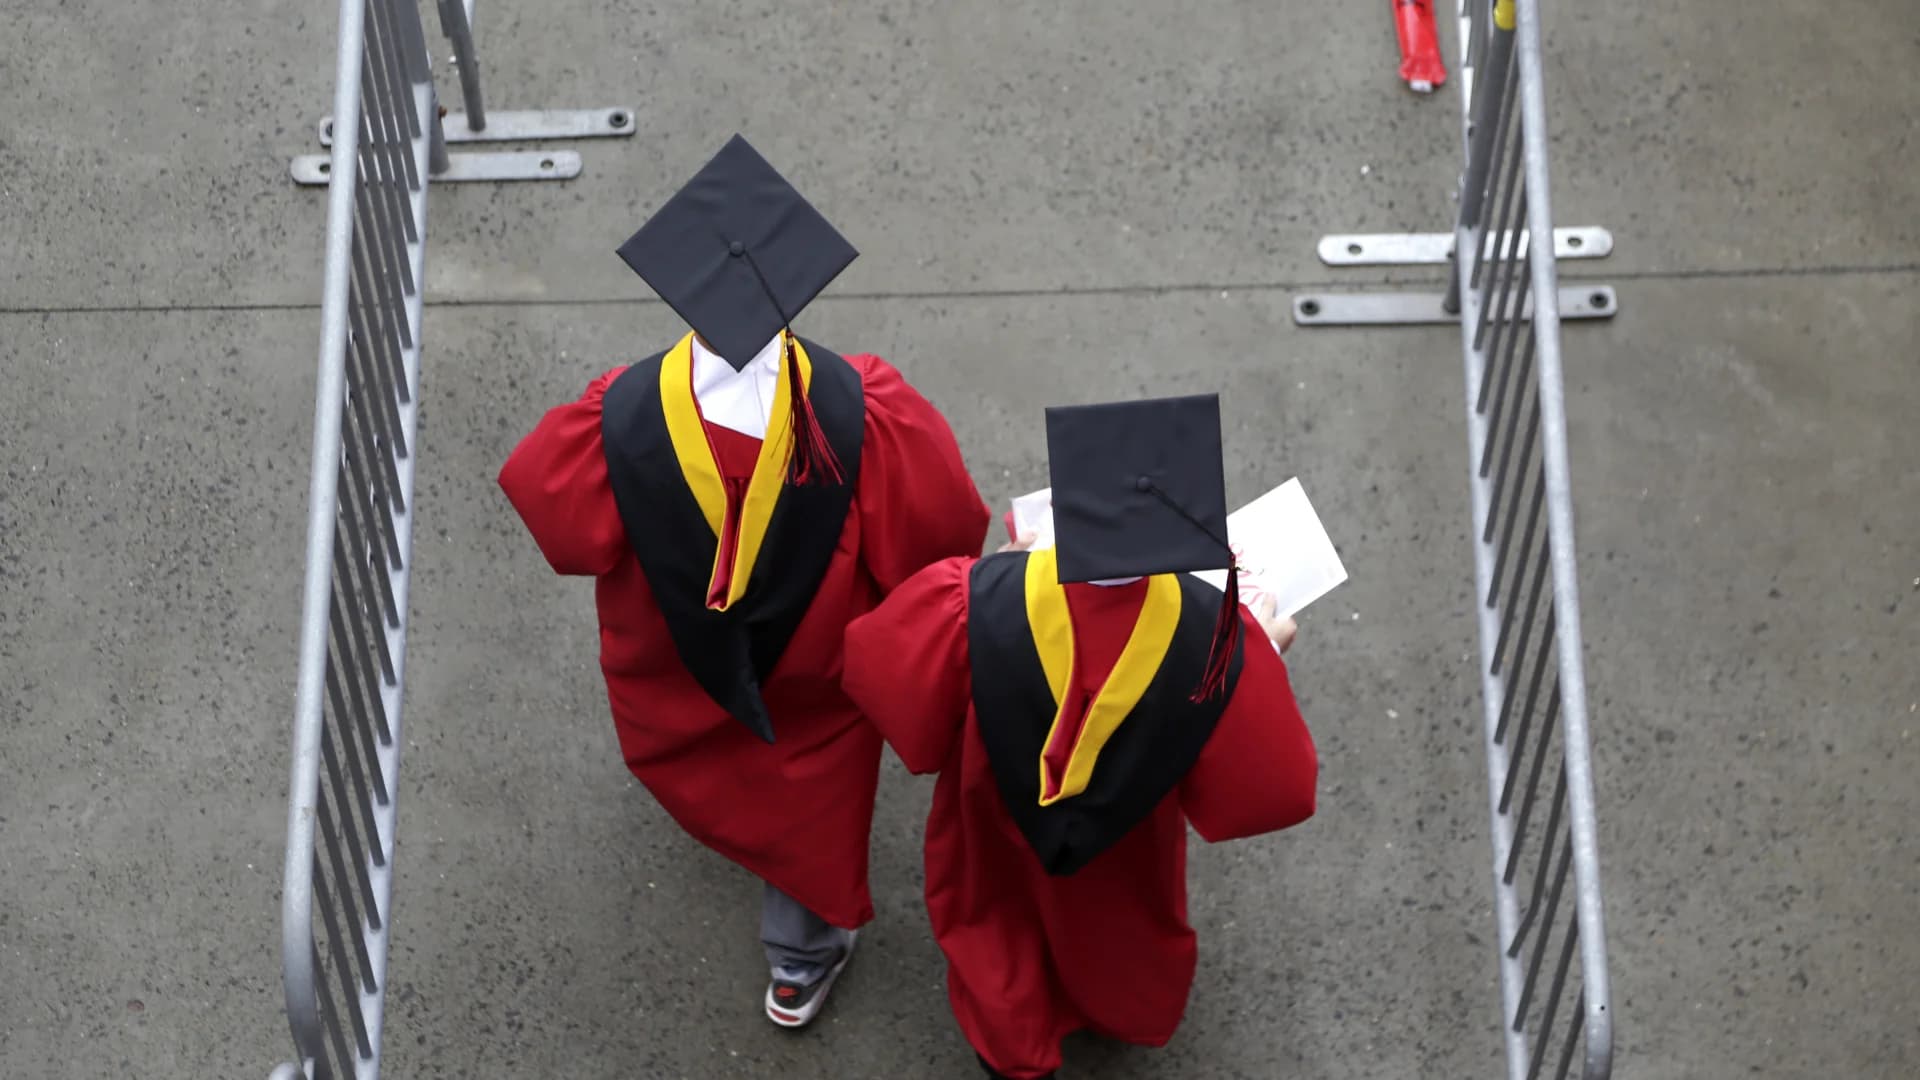 Do you need a grad degree to compete right now? Probably not